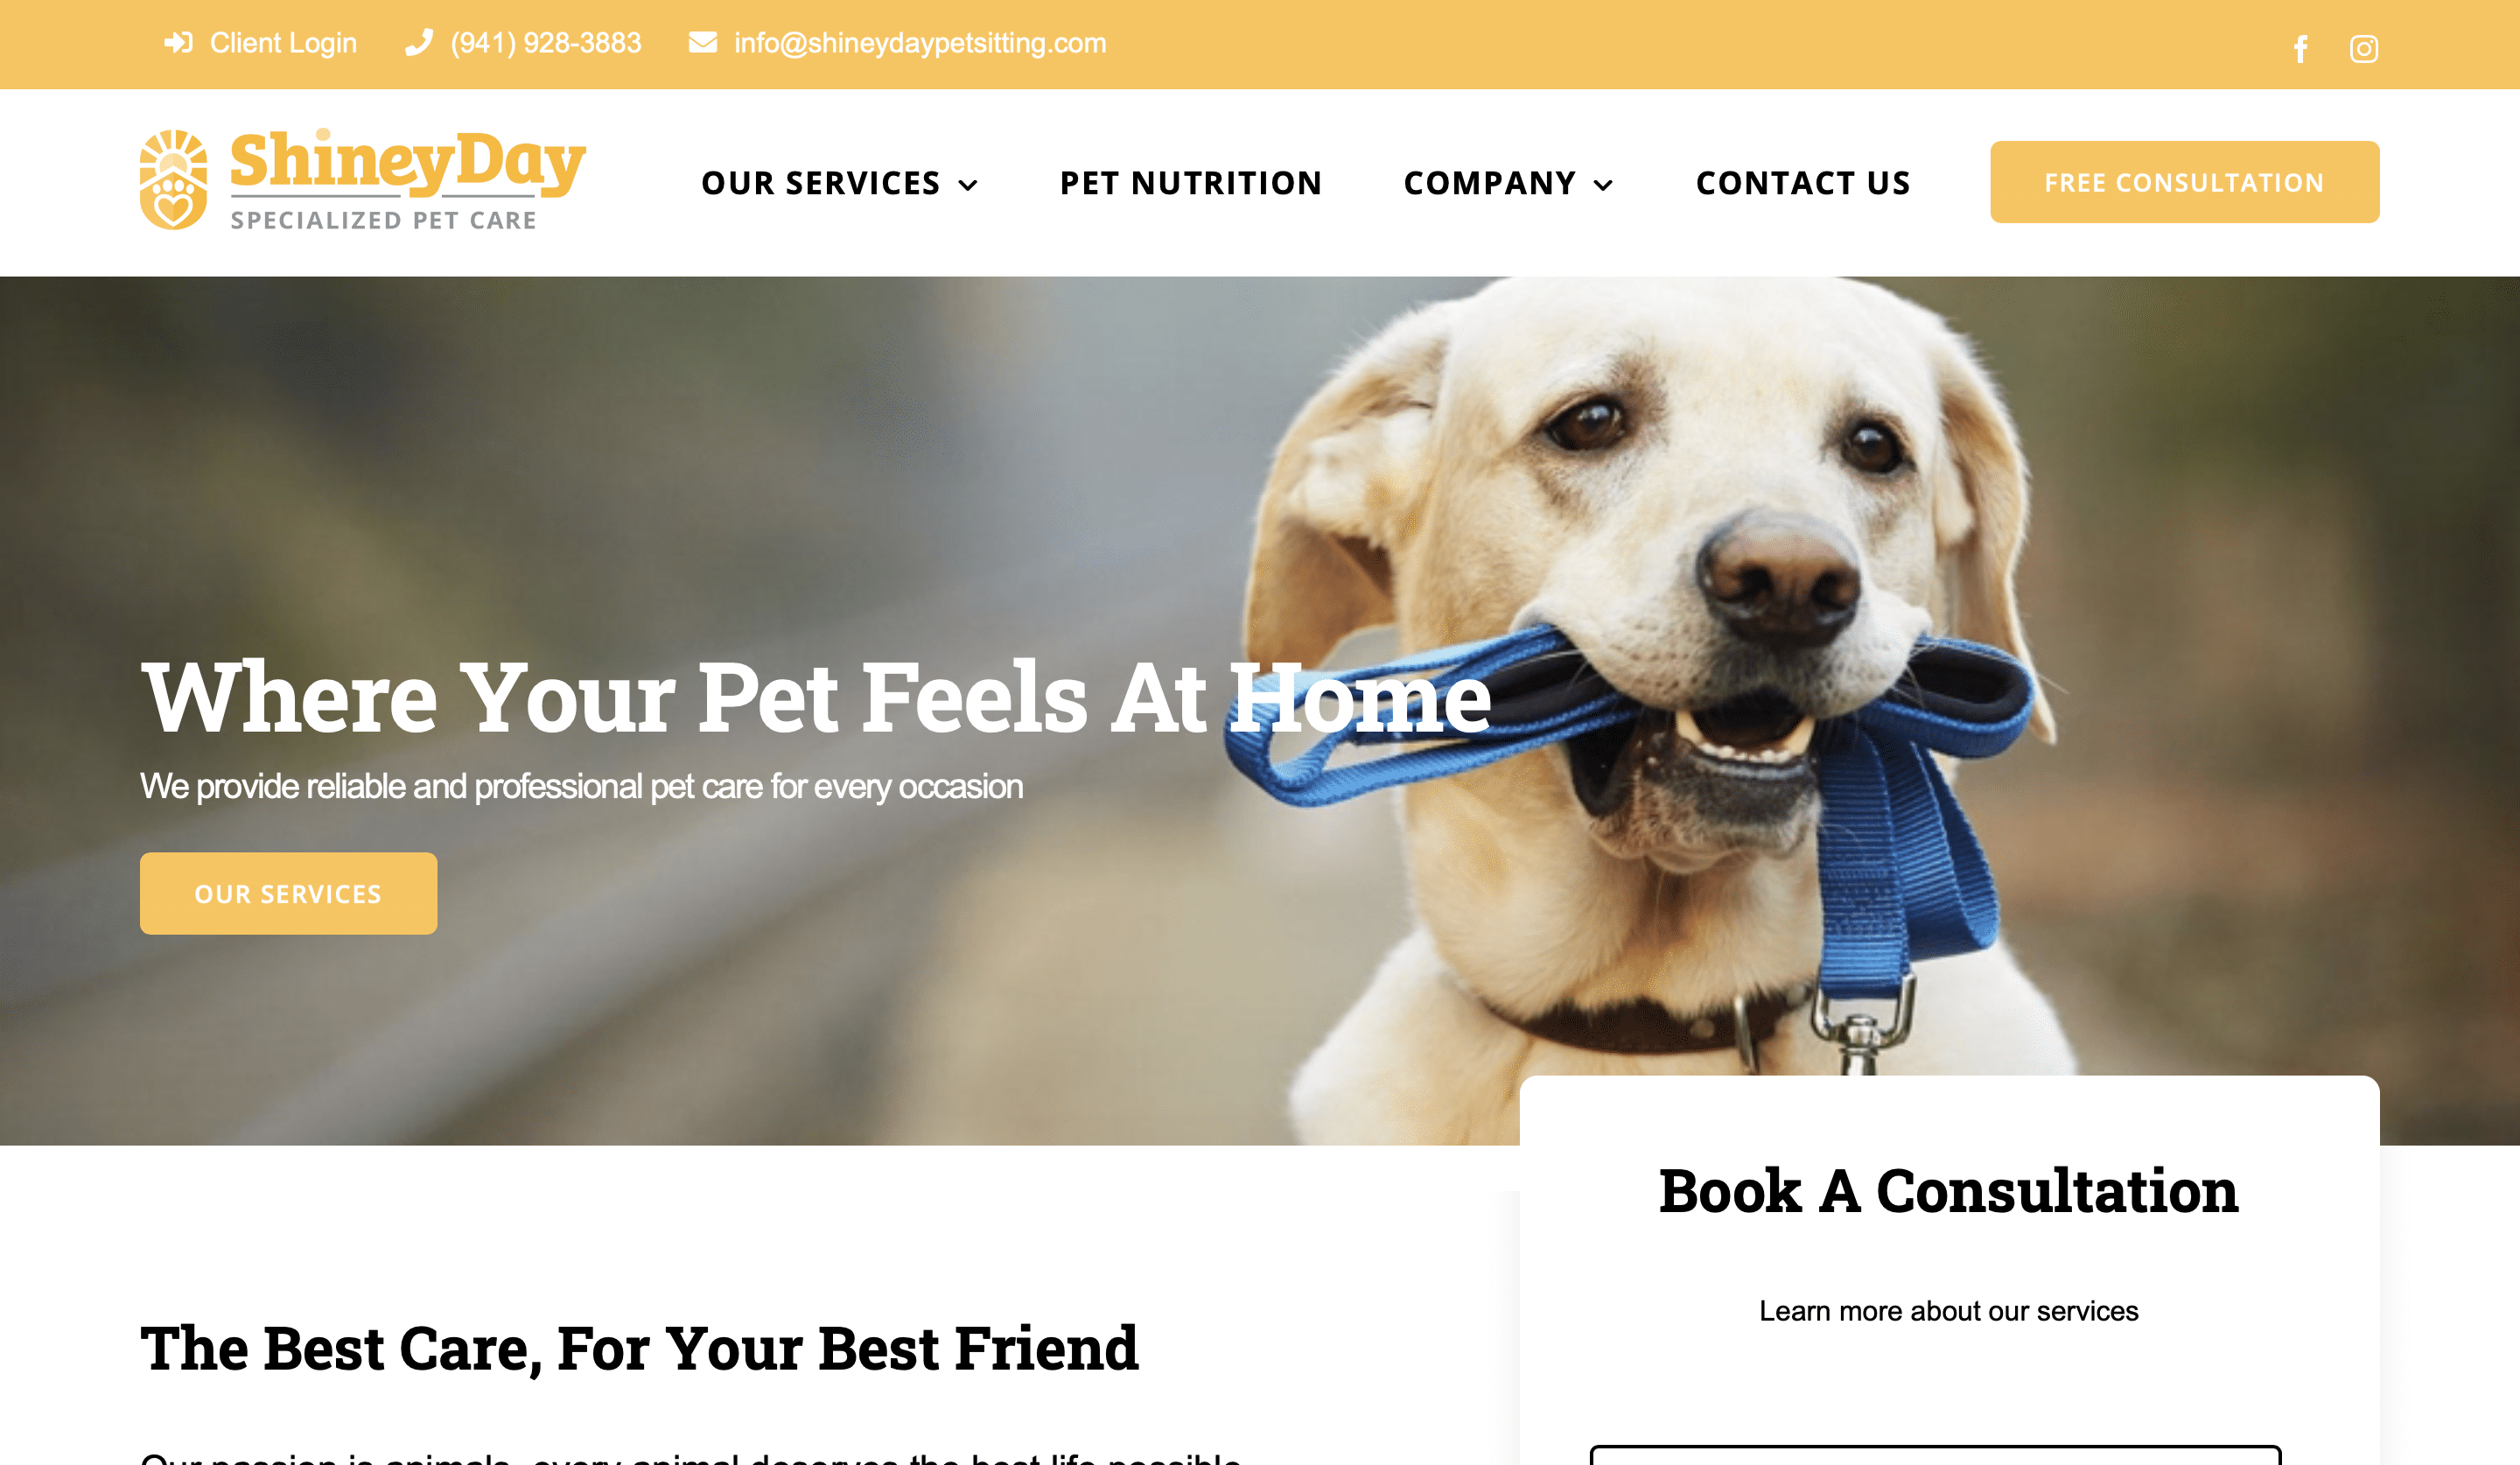 Shiney Day Specialized Pet Care